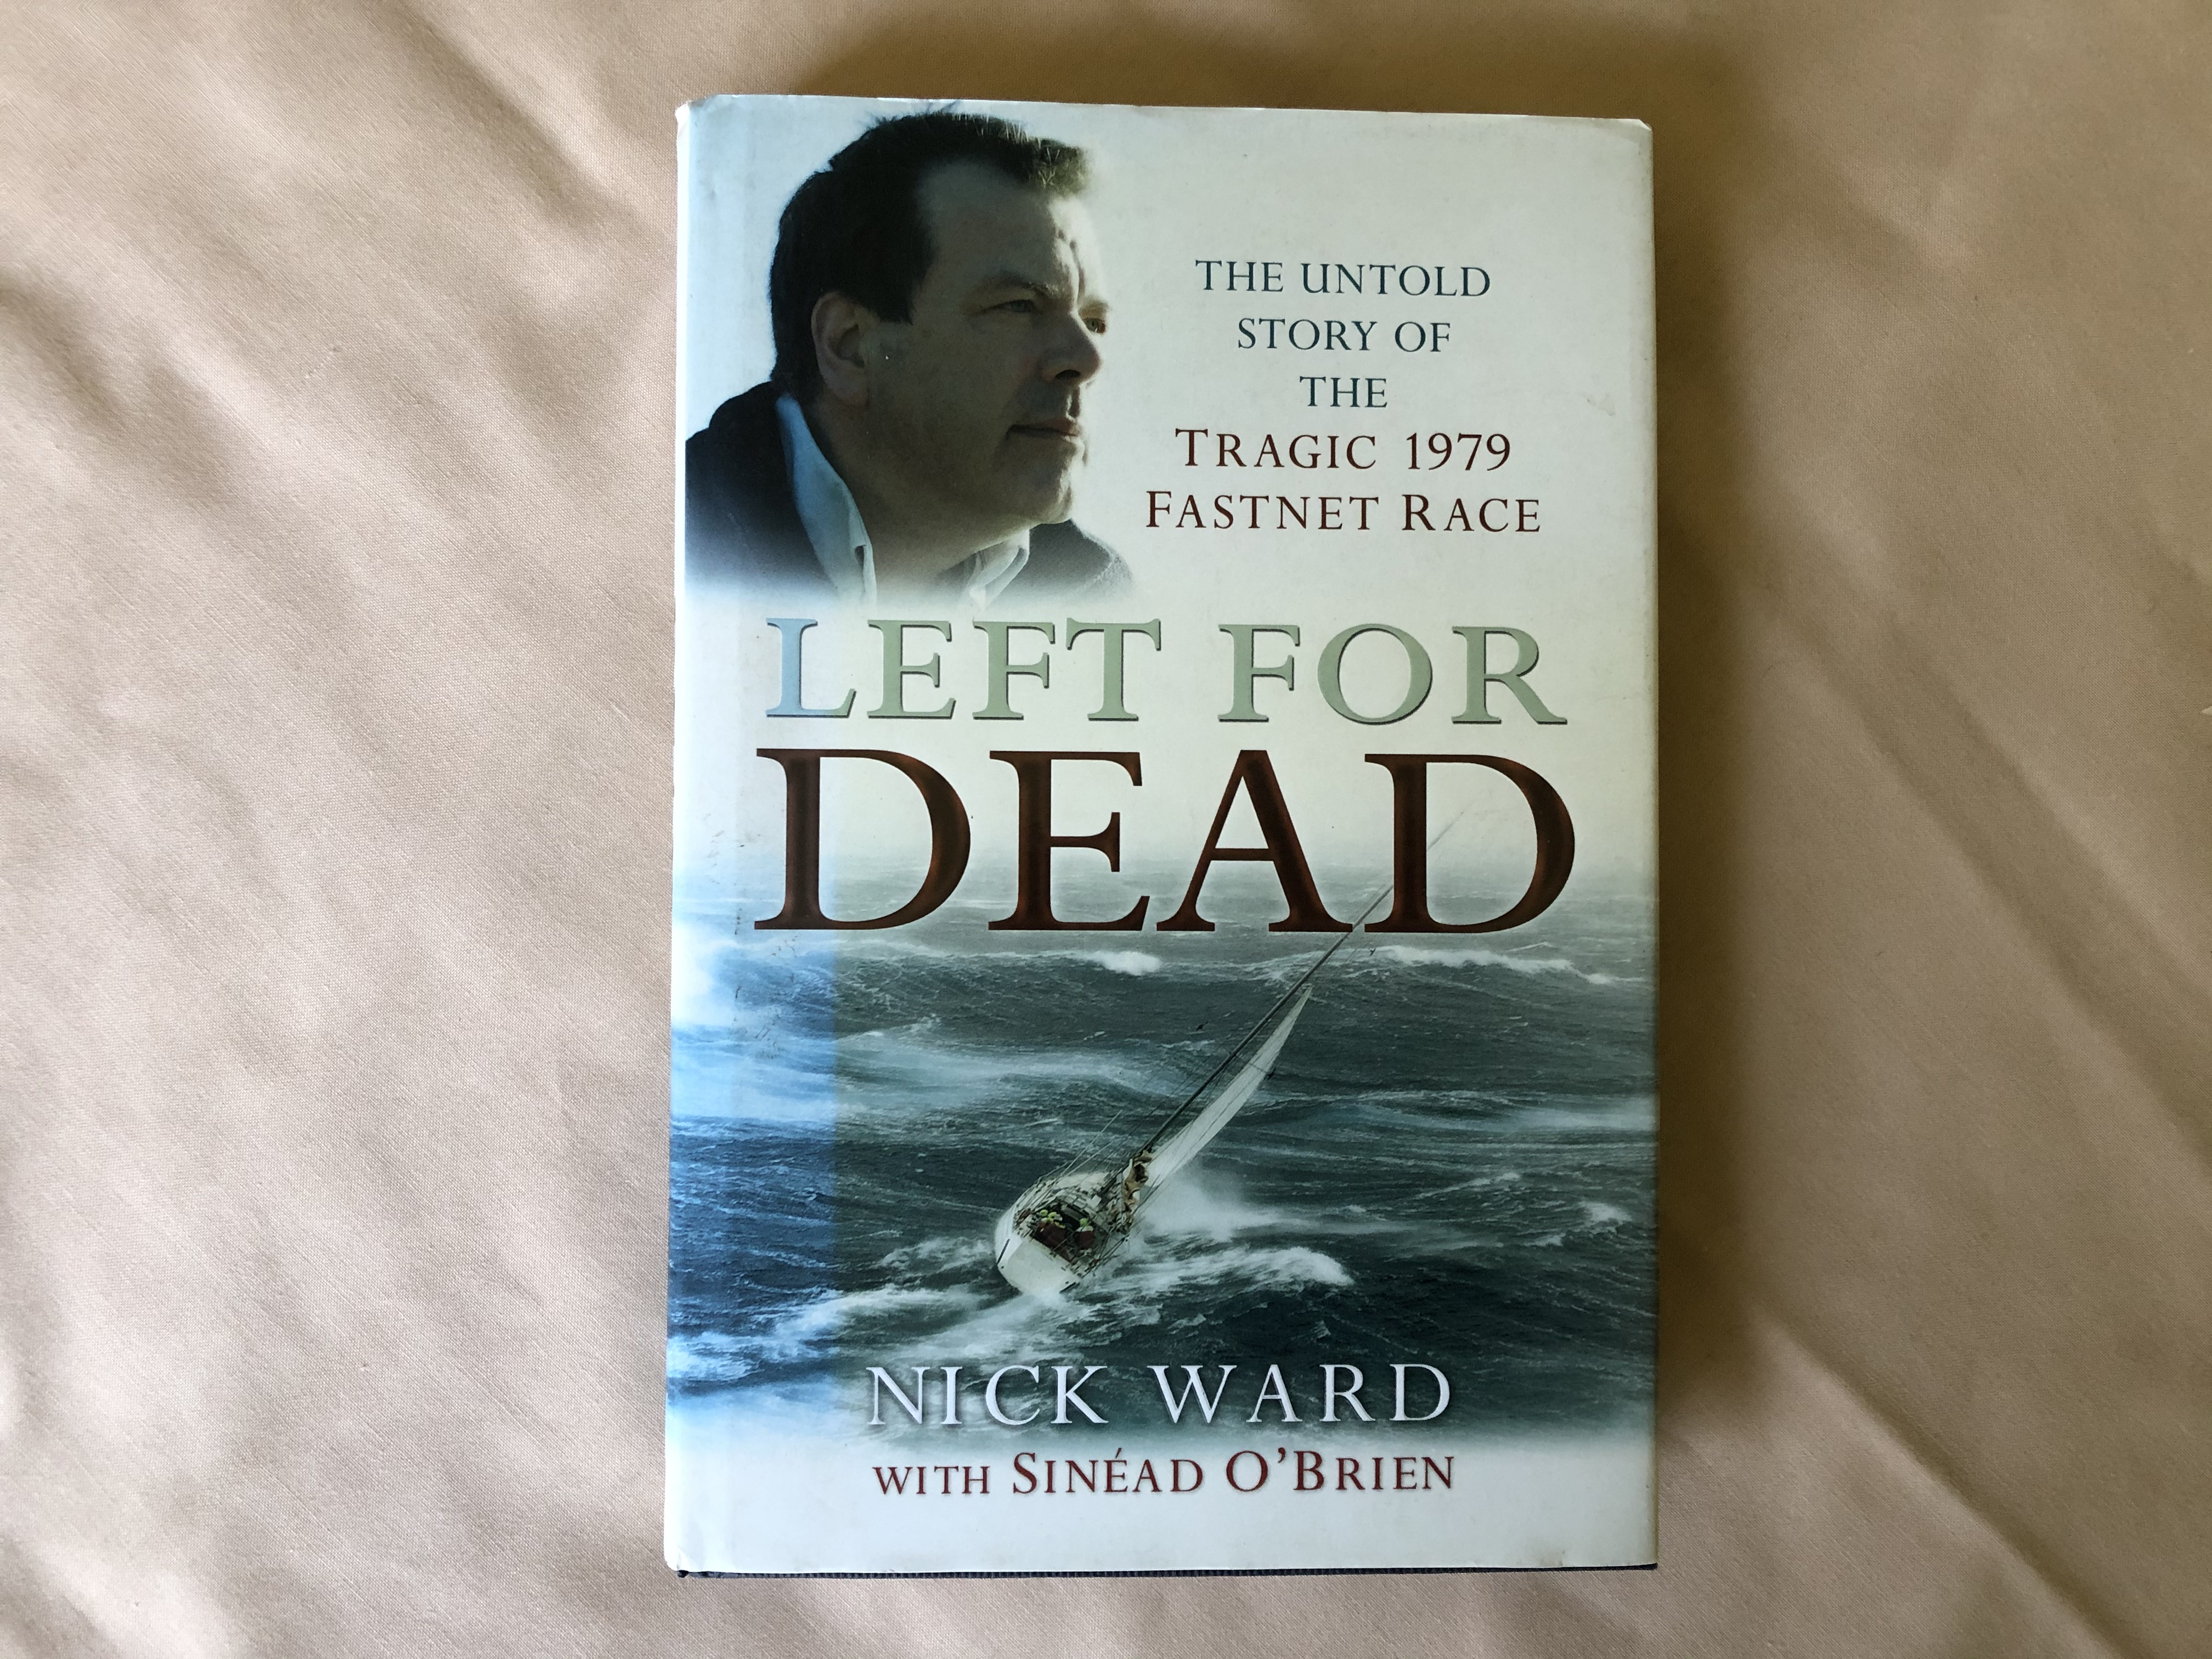 BOOK ENTITLED 'LEFT FOR DEAD' BY NICK WARD COVERING THE FASTNET RACE